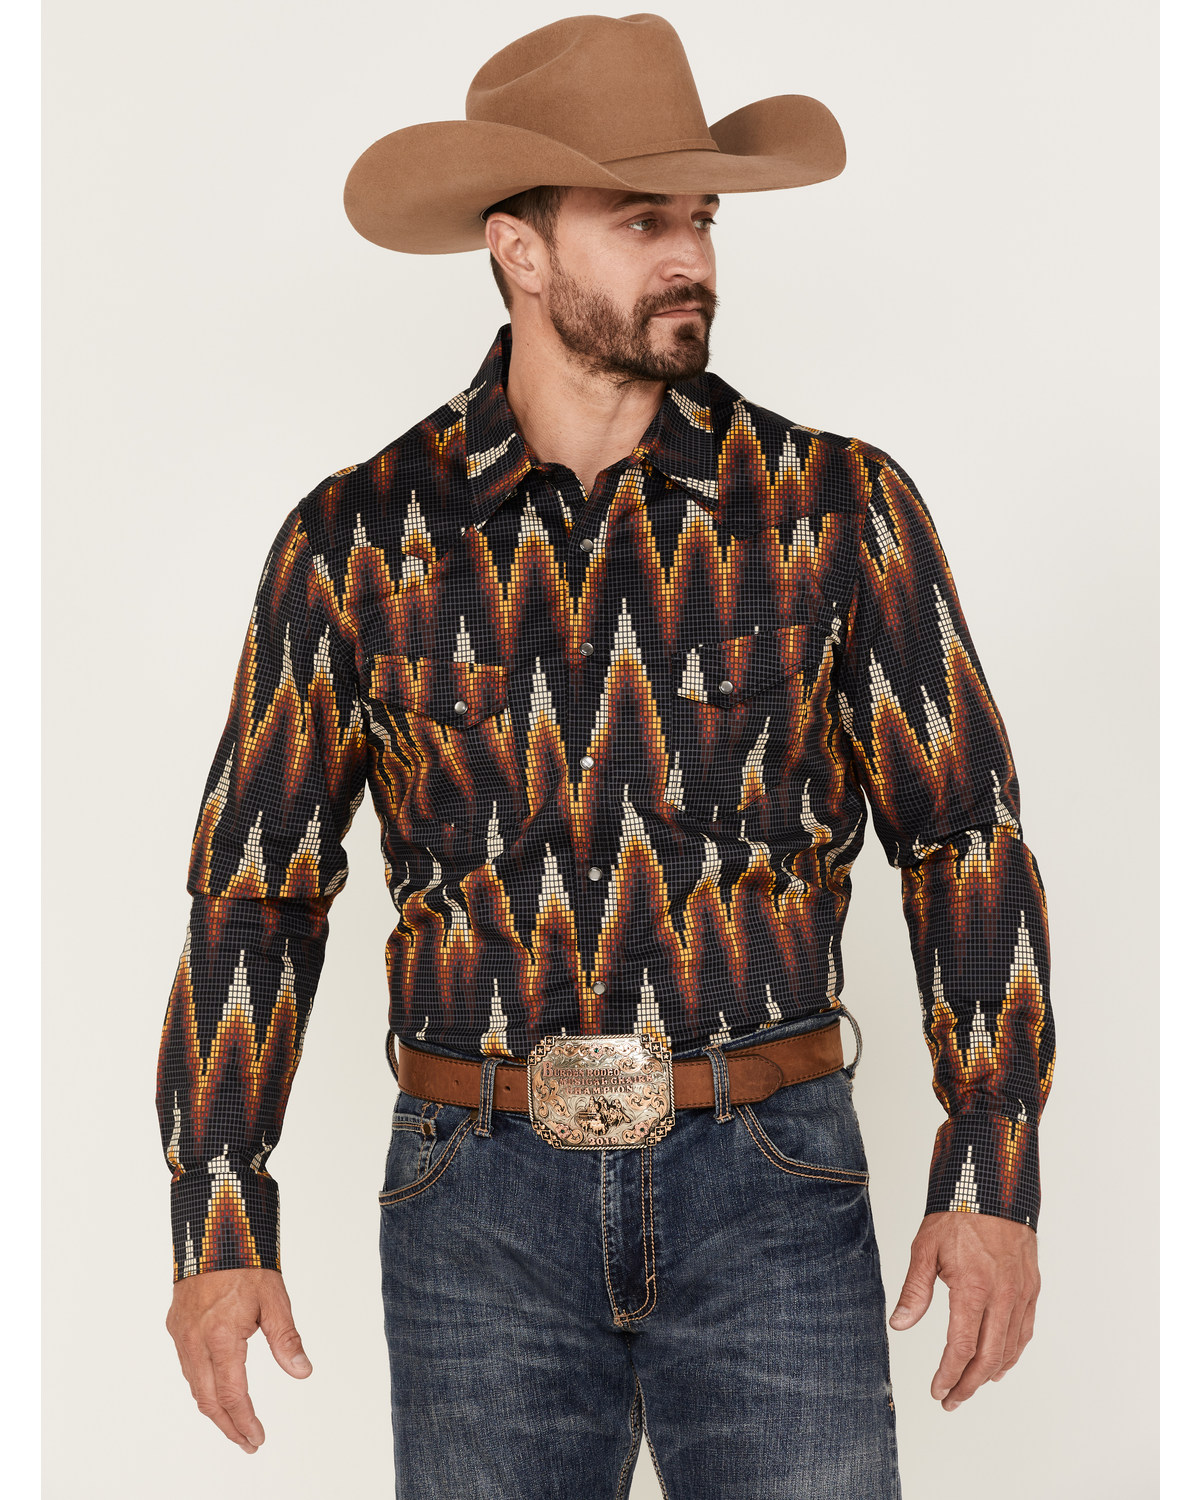 Dale Brisby Men's All-Over Digtal Print Long Sleeve Snap Western Shirt